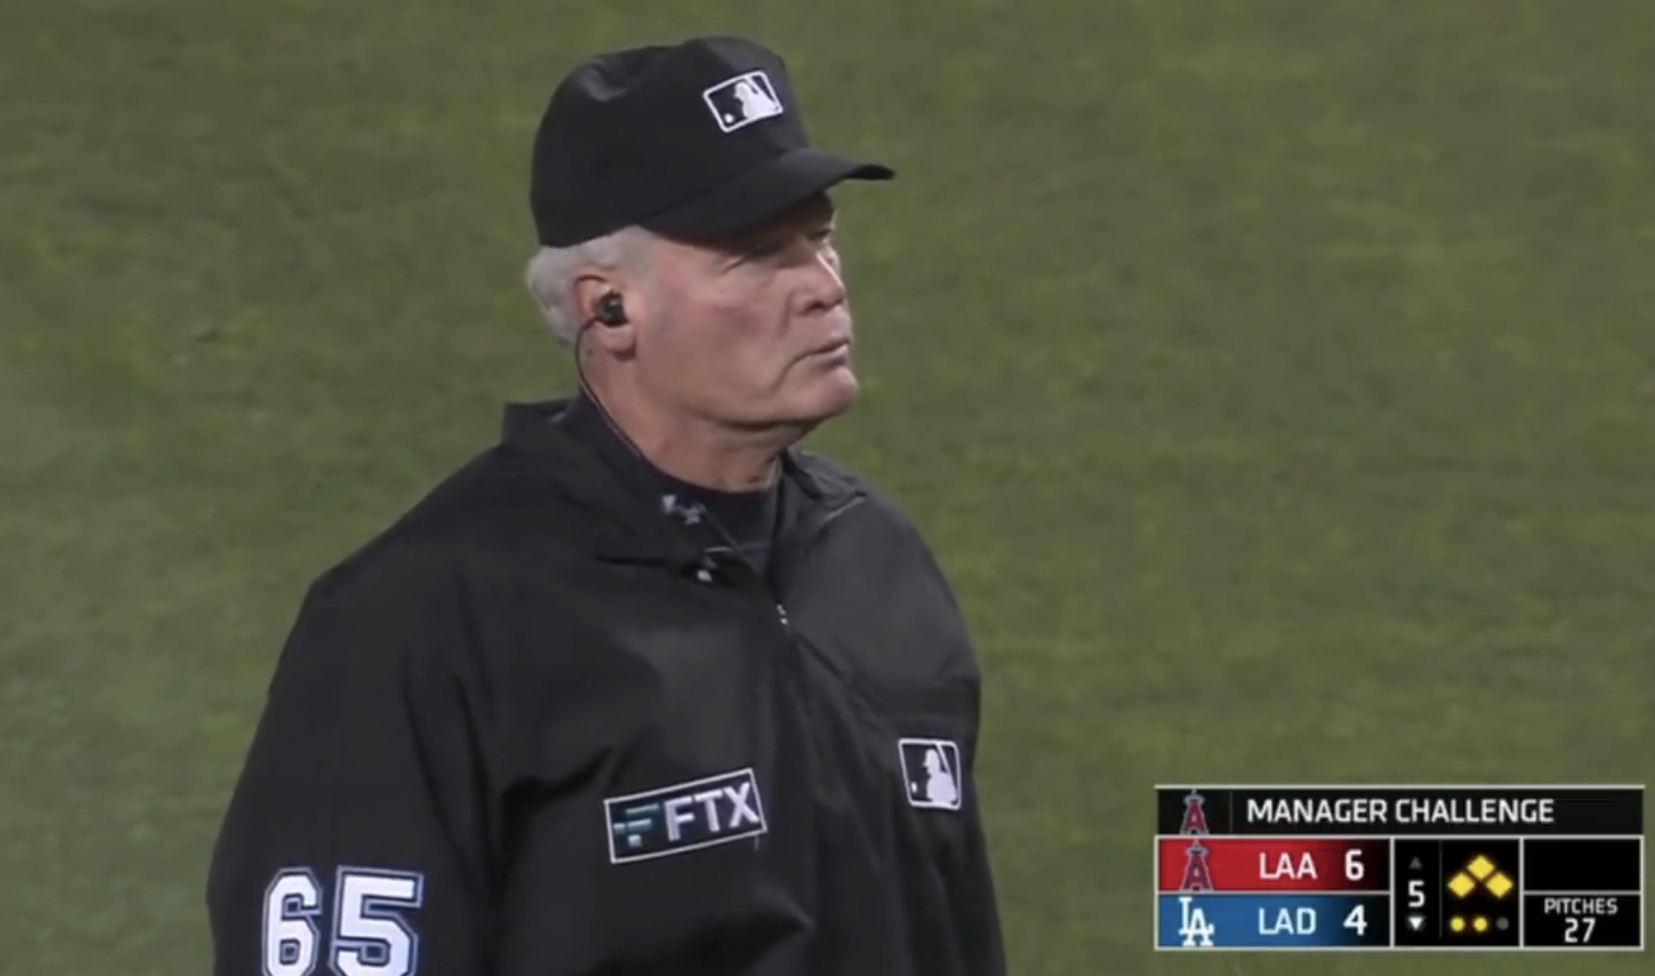 MLB will limit replay reviews to 2 minutes Rob Manfred to meet with players